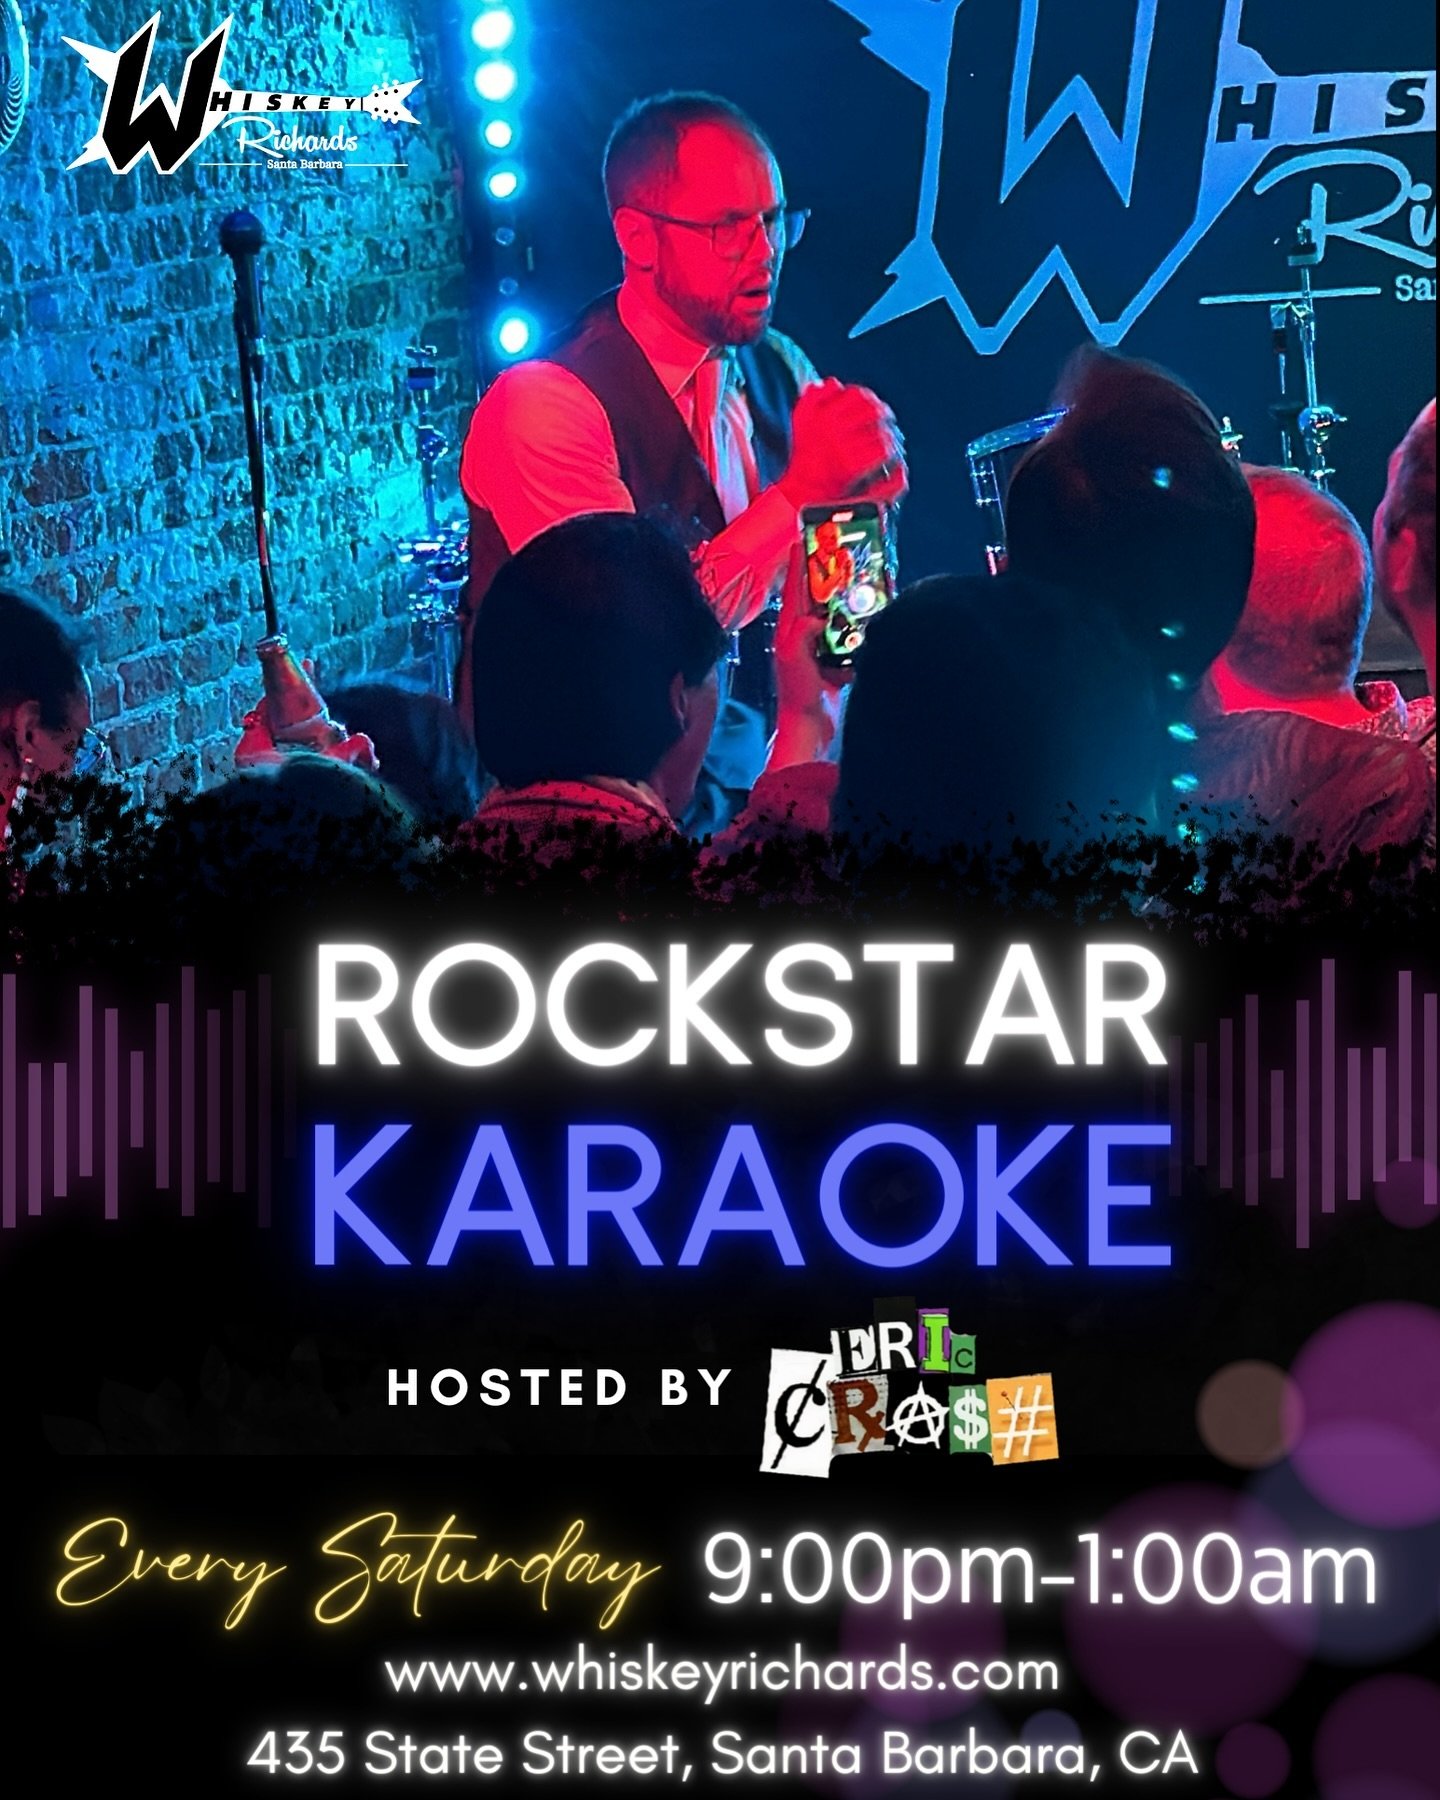 Unleash your inner rockstar at Whiskey Richards! Join us for Rockstar Karaoke nights, where you take the stage and own the spotlight! Are you ready to rock?! #RockstarKaraoke #LiveMusic #DowntownSB #MagicMoments #SantaBarbara #WhiskeyRichards